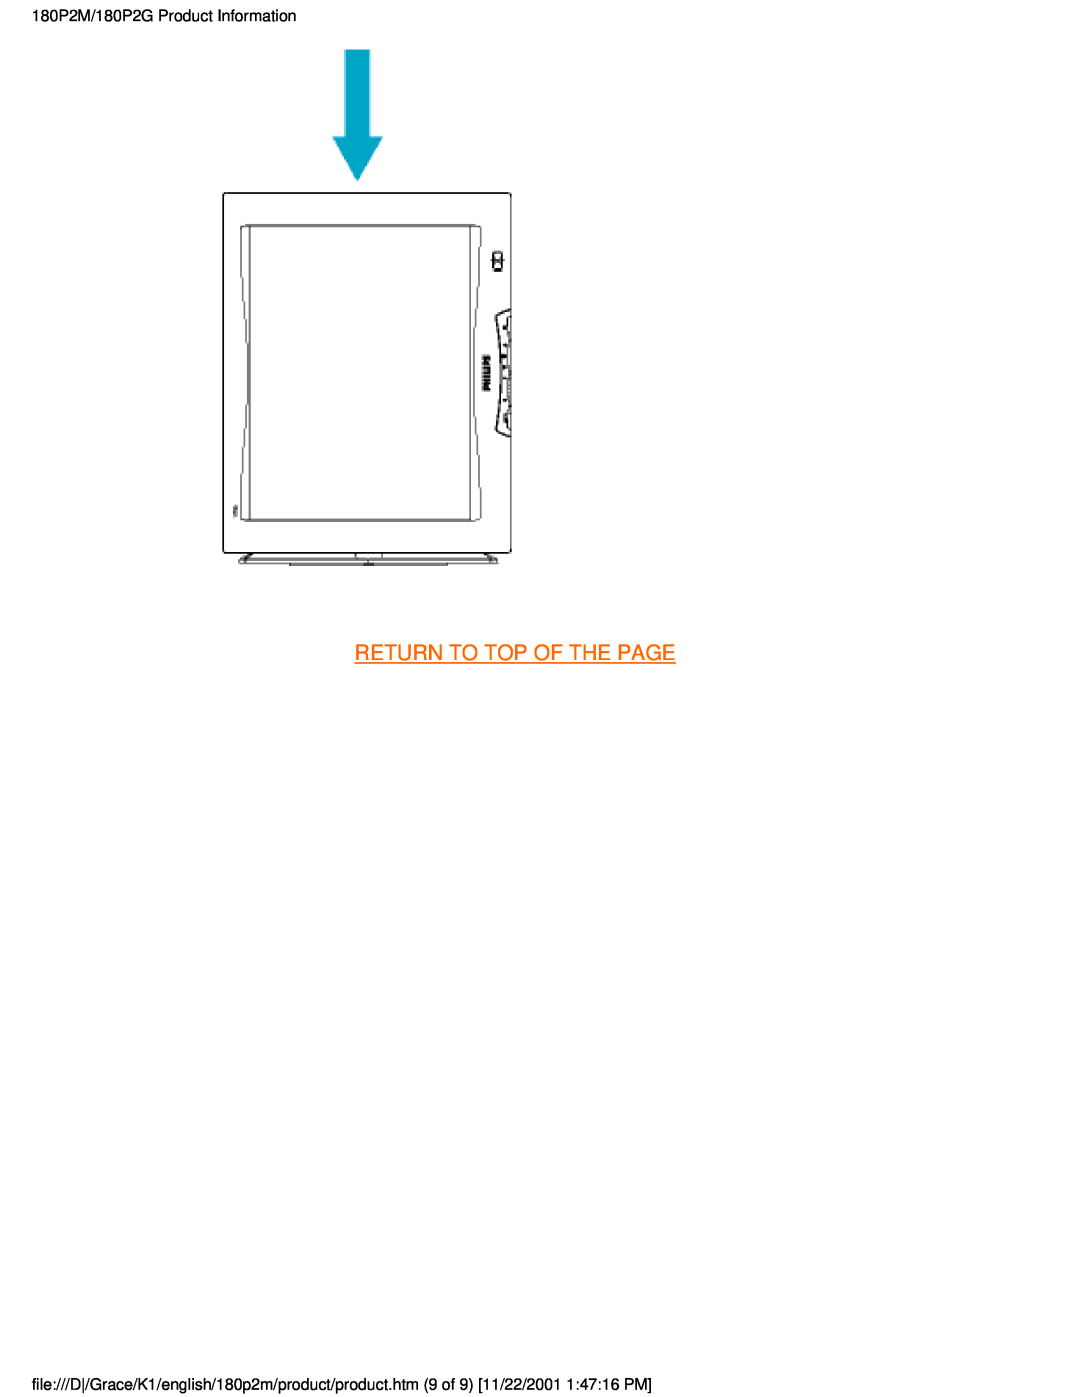 Philips user manual Return To Top Of The Page, 180P2M/180P2G Product Information 